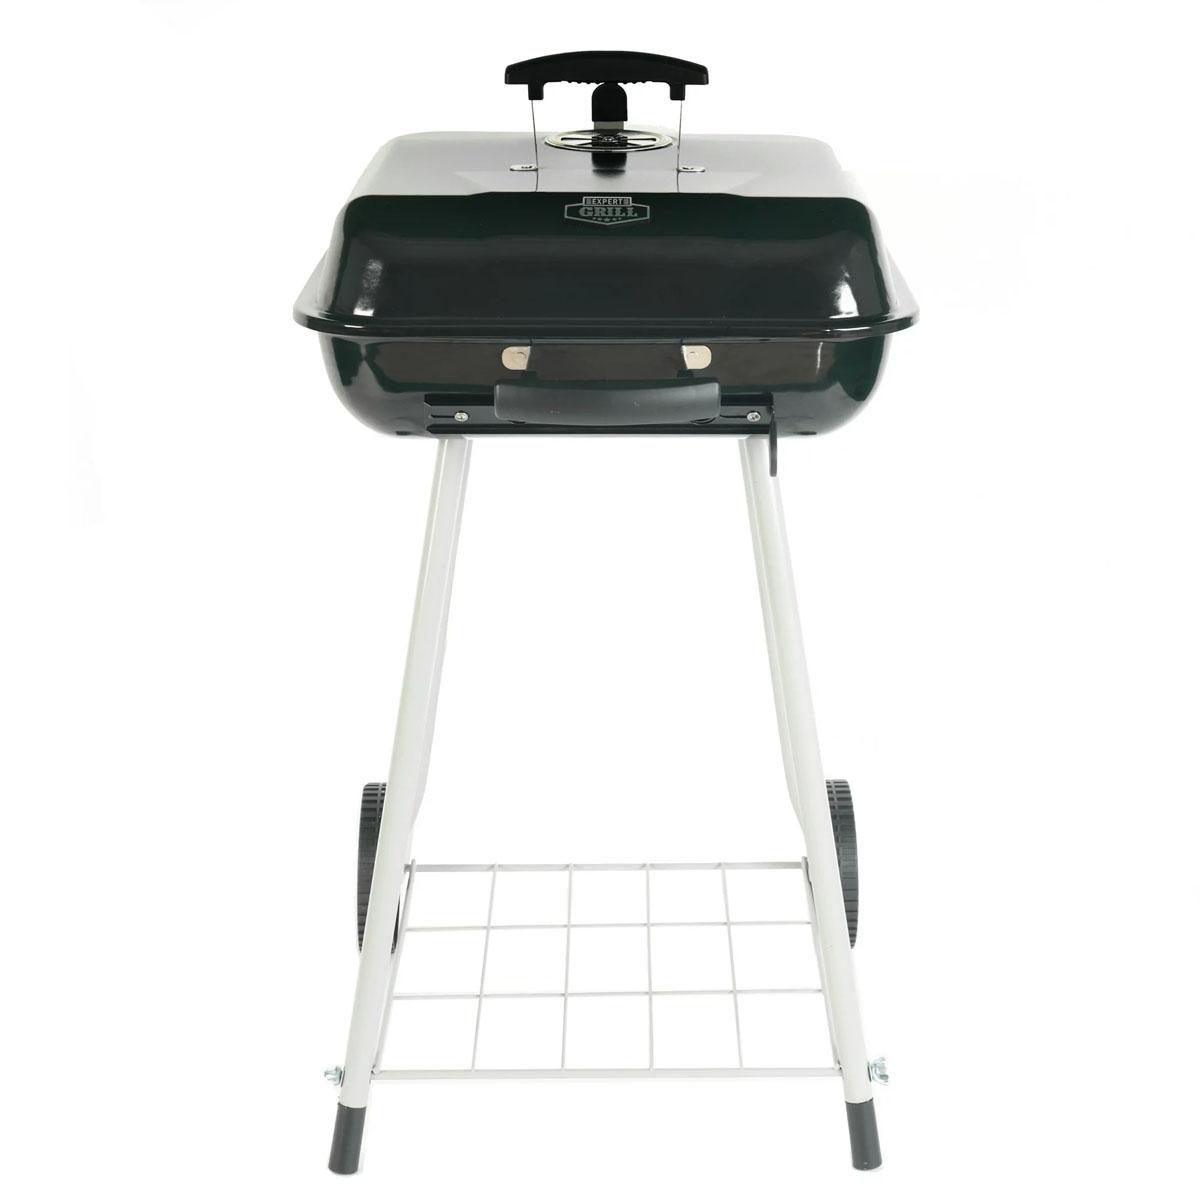 Expert Grill 17.5in Square Steel Charcoal Grill for $19.97